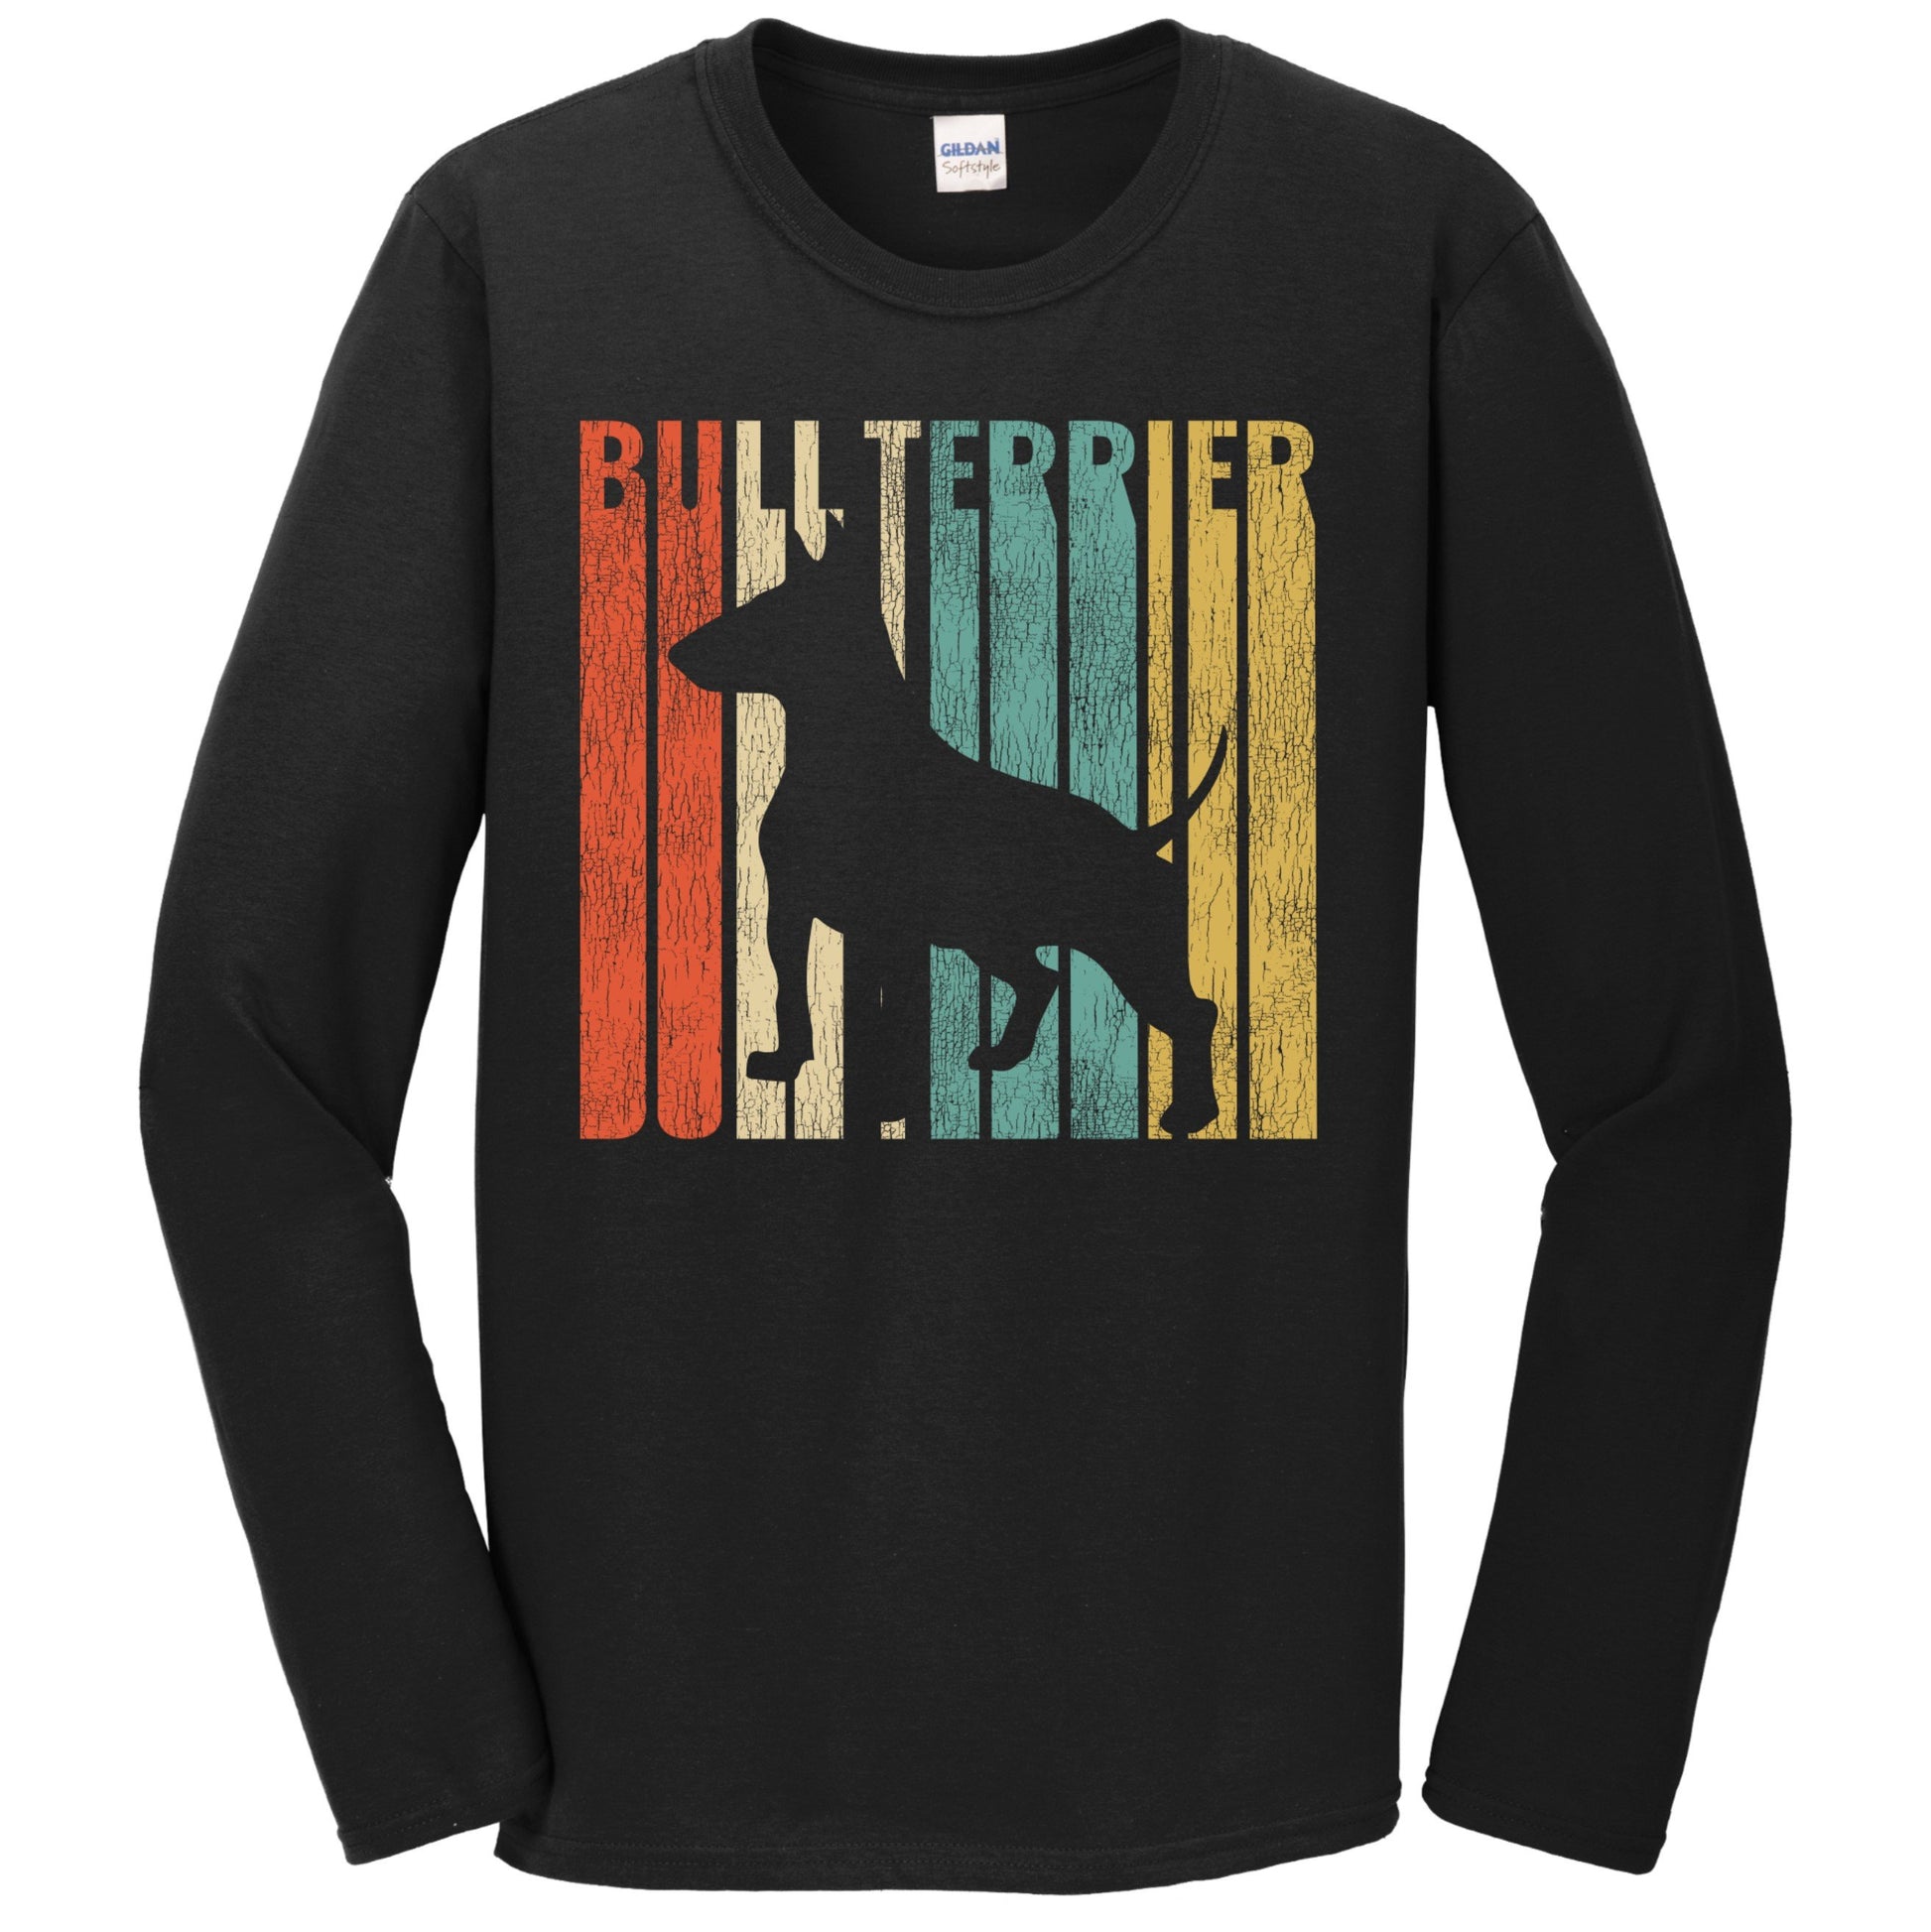 Retro 1970's Style Bull Terrier Dog Silhouette Cracked Distressed Long Sleeve T-Shirt